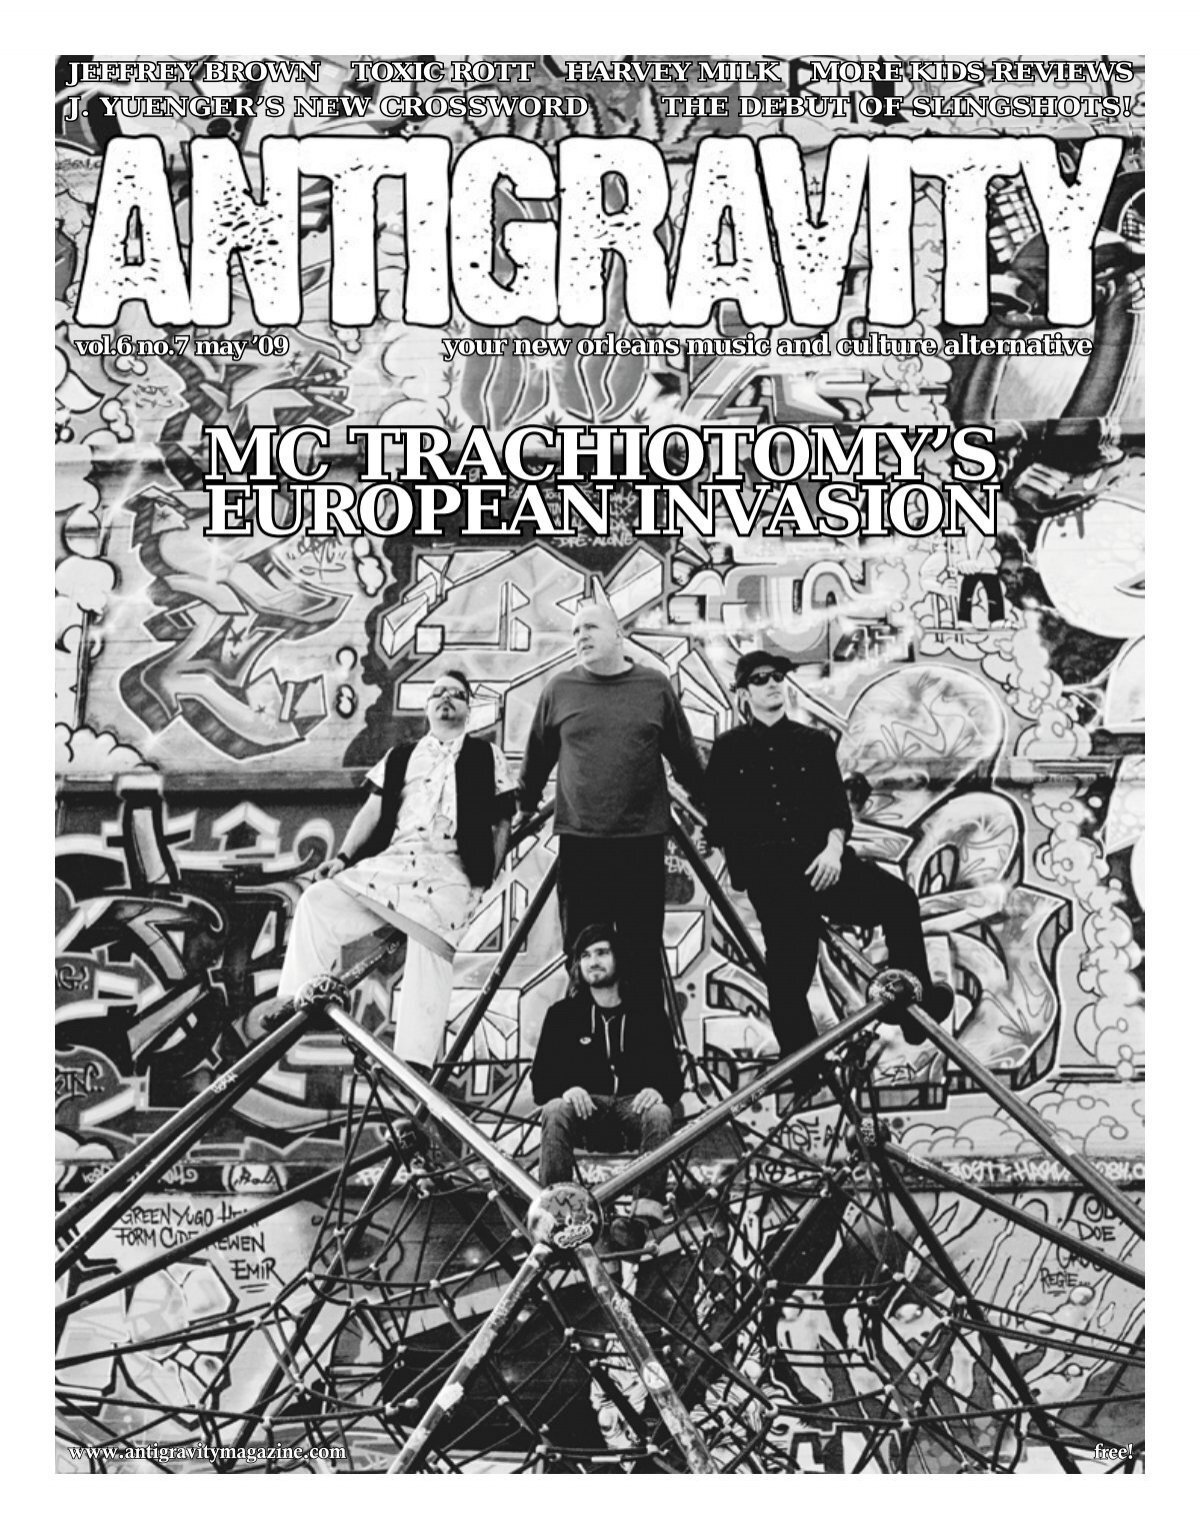 PROPER CREDIT: A LOOK INTO NEW ORLEANS' RISING UNDERGROUND RAP AND R&B  SCENE - ANTIGRAVITY Magazine